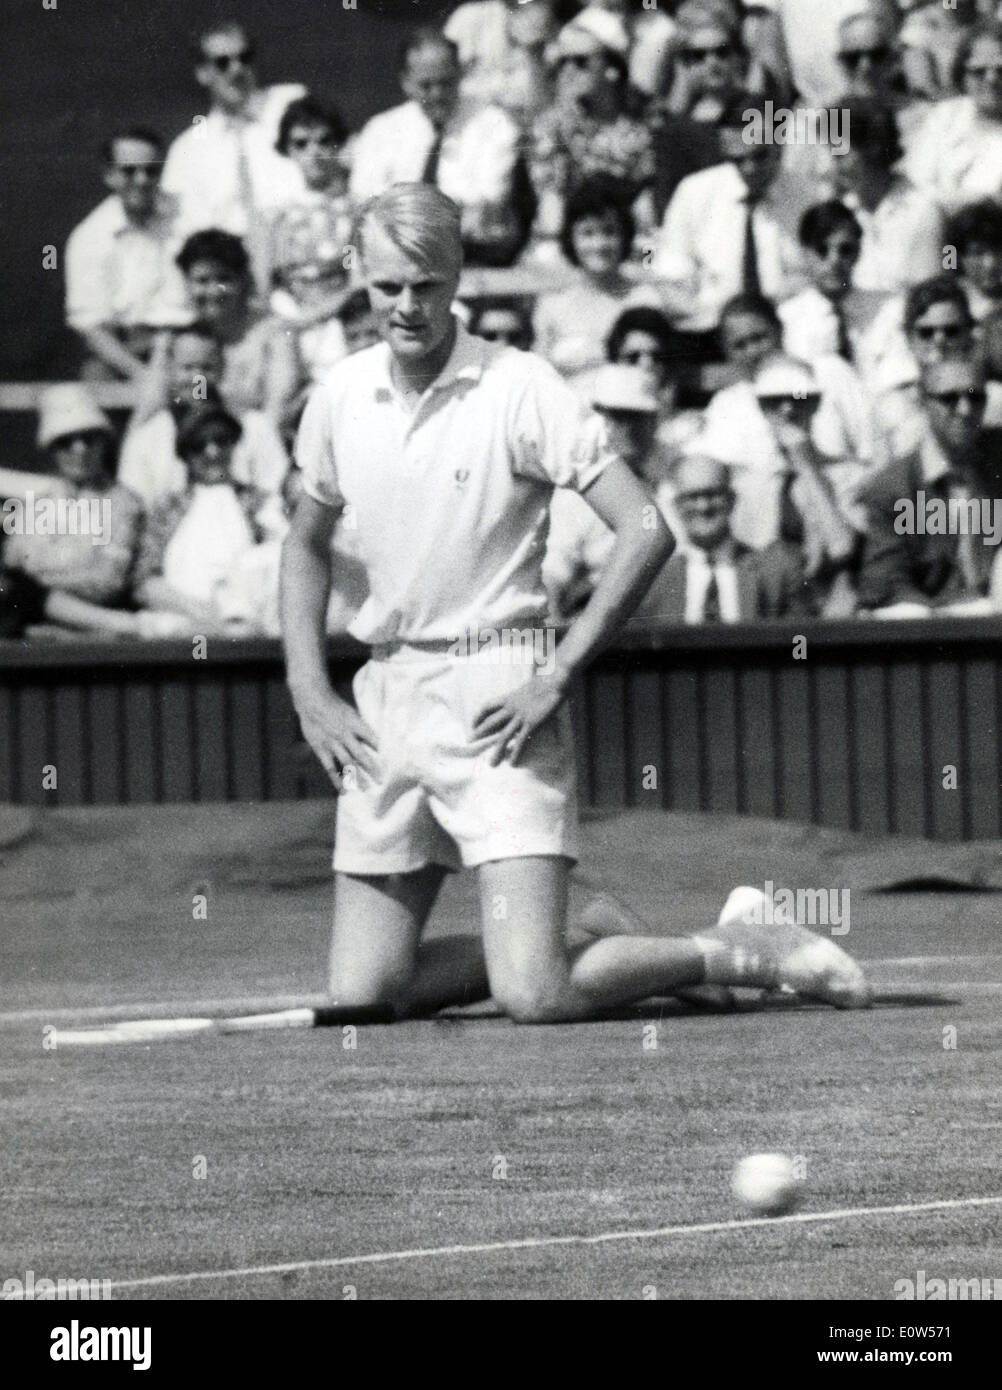 June 28, 1961 - London, England, U.K. - J. LUNDQUIST of Sweden strikes a disgusted pose with his hands on his hips during his match against R.D. Ralston on the third day of Wimbledon. Stock Photo